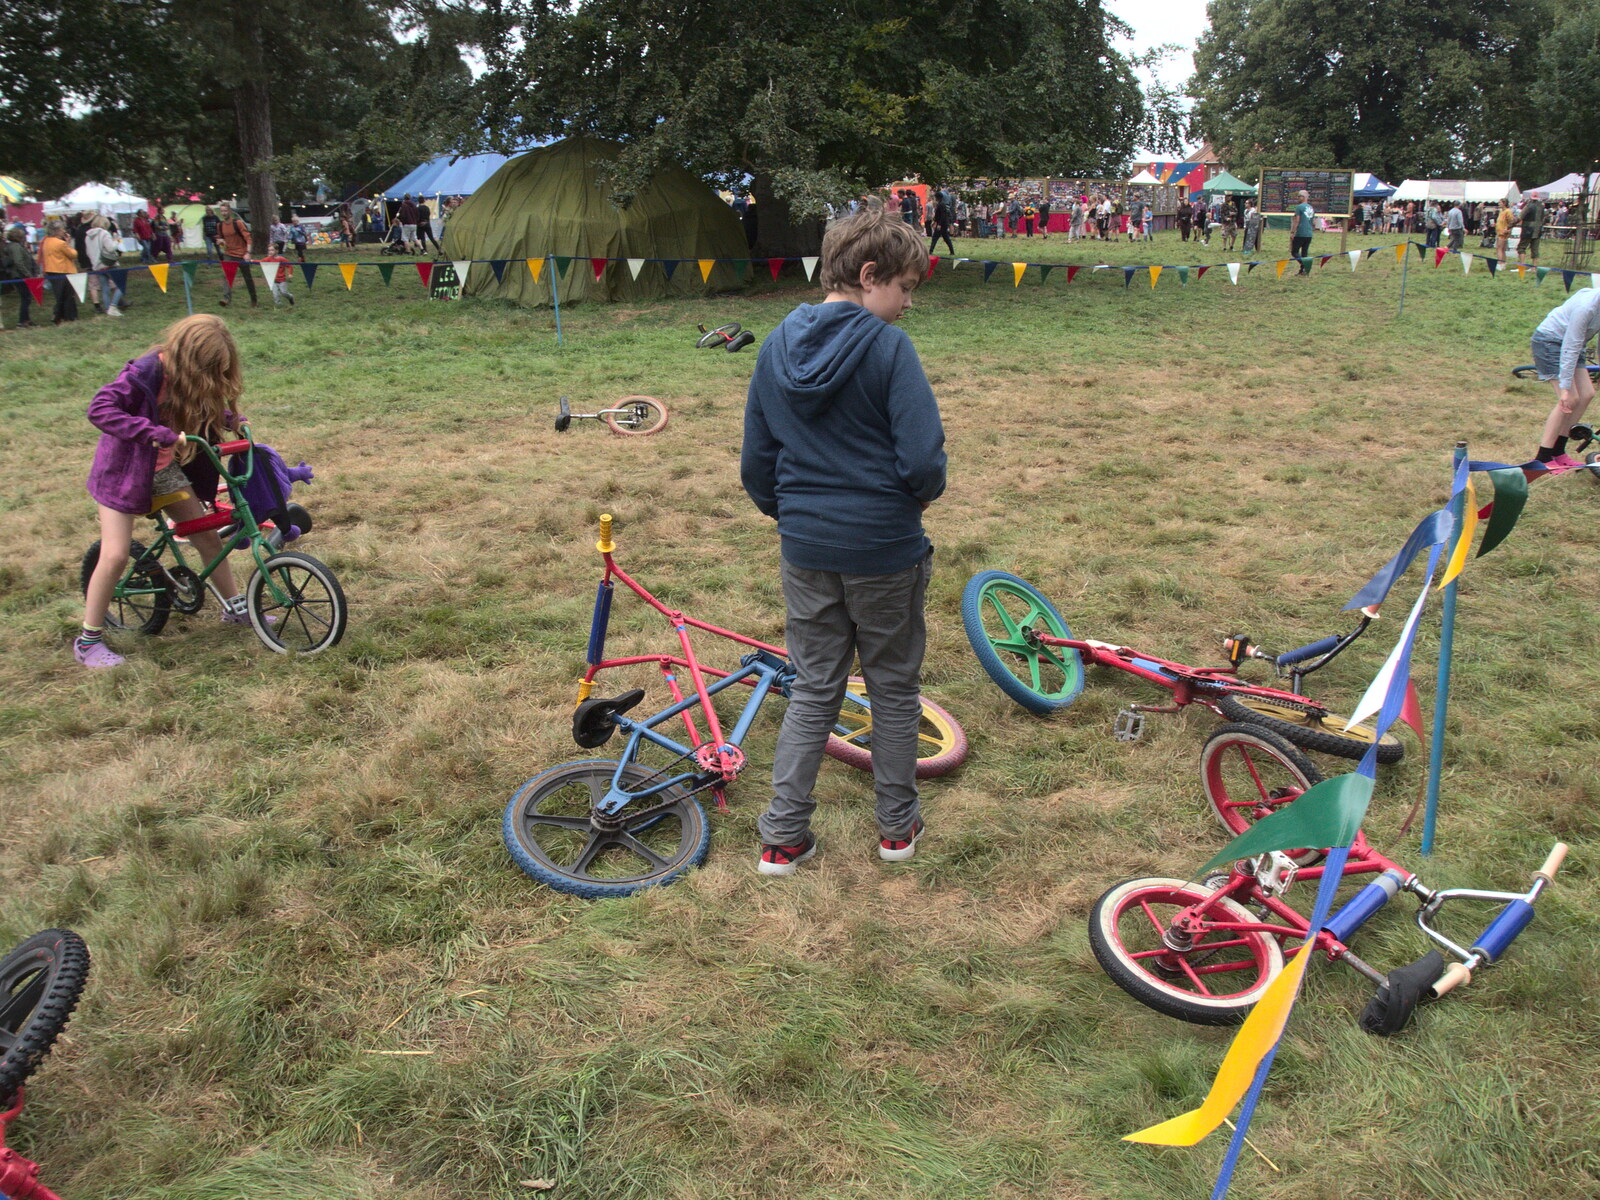 Fred looks at novelty bikes from Maui Waui Festival, Hill Farm, Gressenhall, Norfolk - 28th August 2021